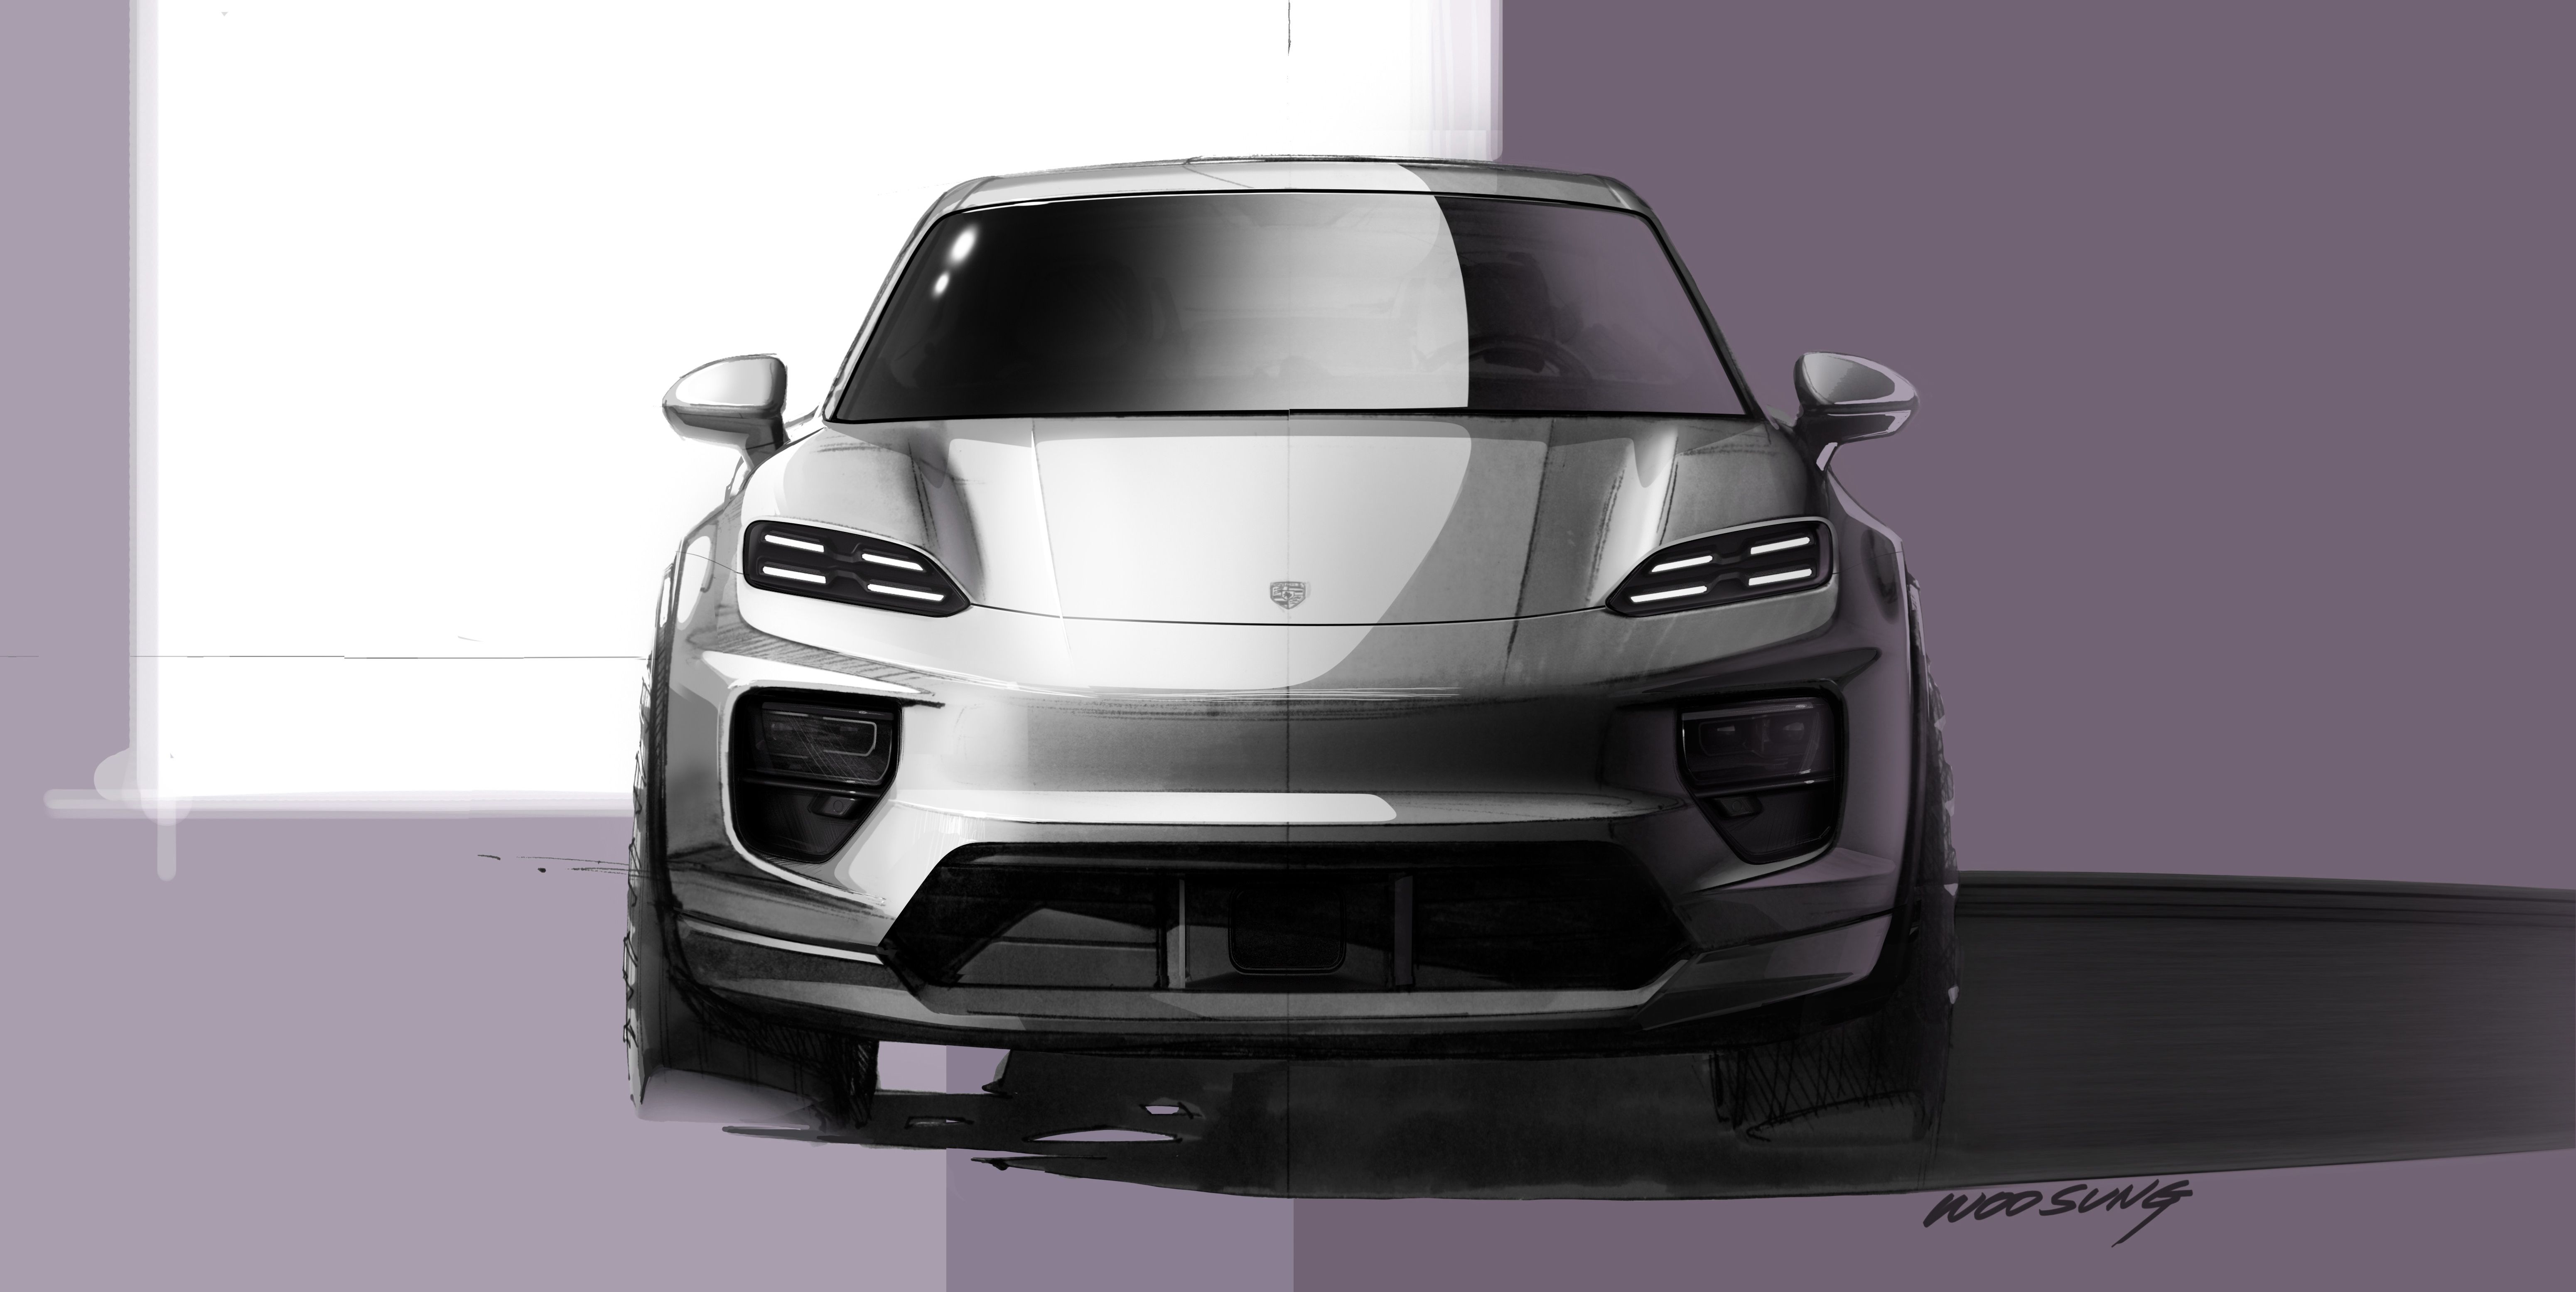 Here's an Early Look at the Next Porsche Macan